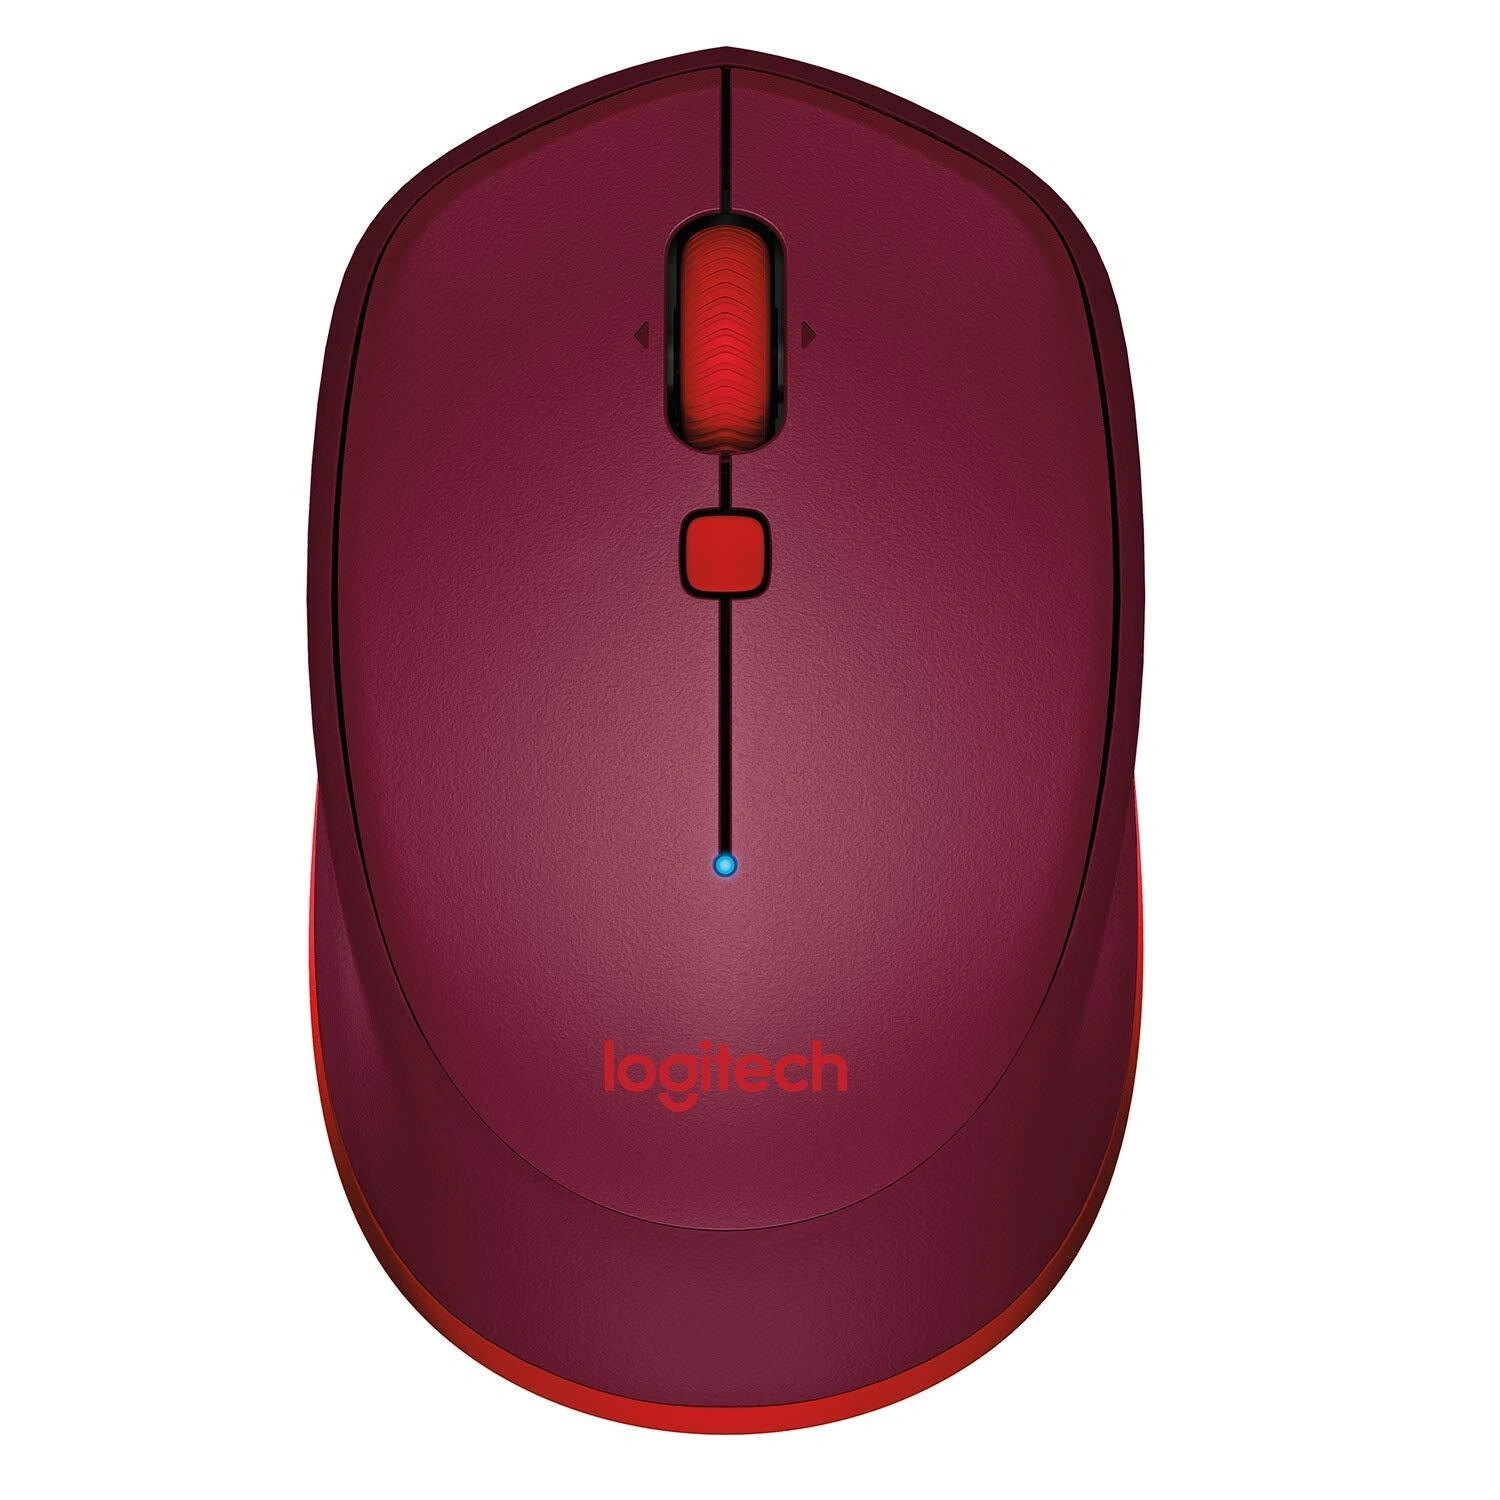 M337
Bluetooth mouse Red-M337MOUBTRED